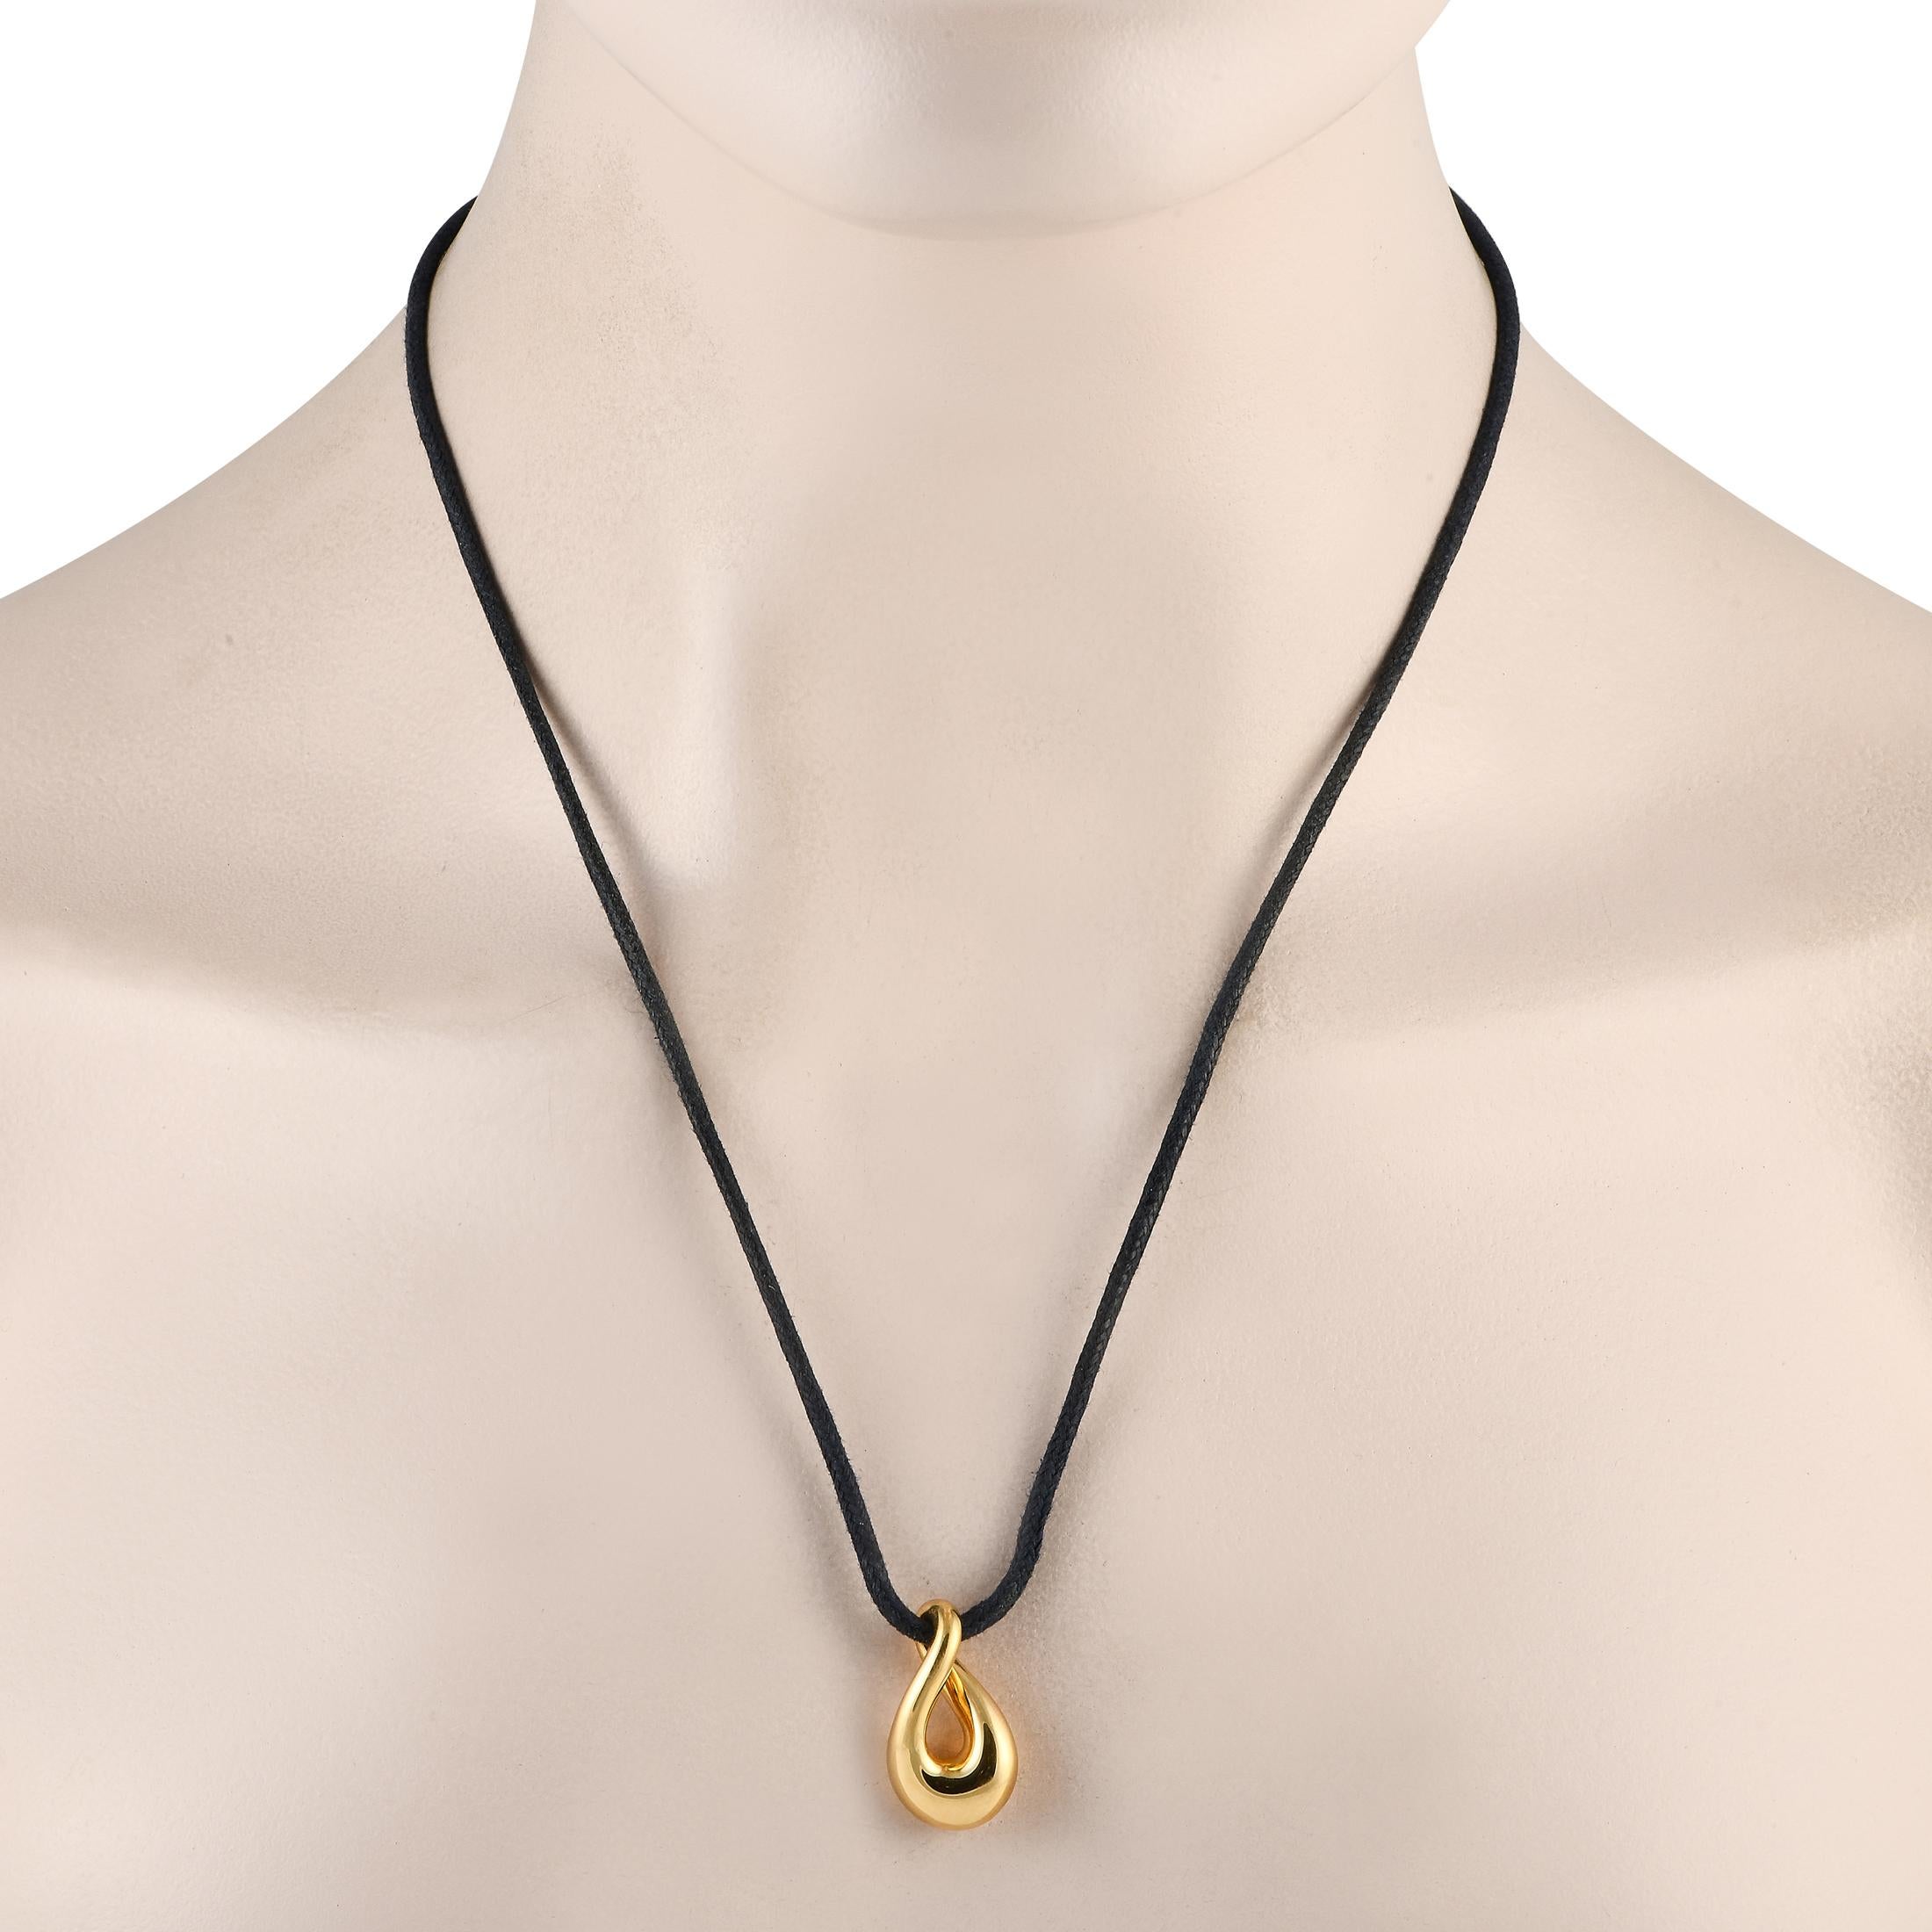 From Paris-founded jewelry brand, here is a contemporary necklace to suit the style of a cool and edgy fashionista. This piece features a stylized infinity swirl pendant in solid 18K yellow gold, held by a black cord.This Fred of Paris 18K Yellow